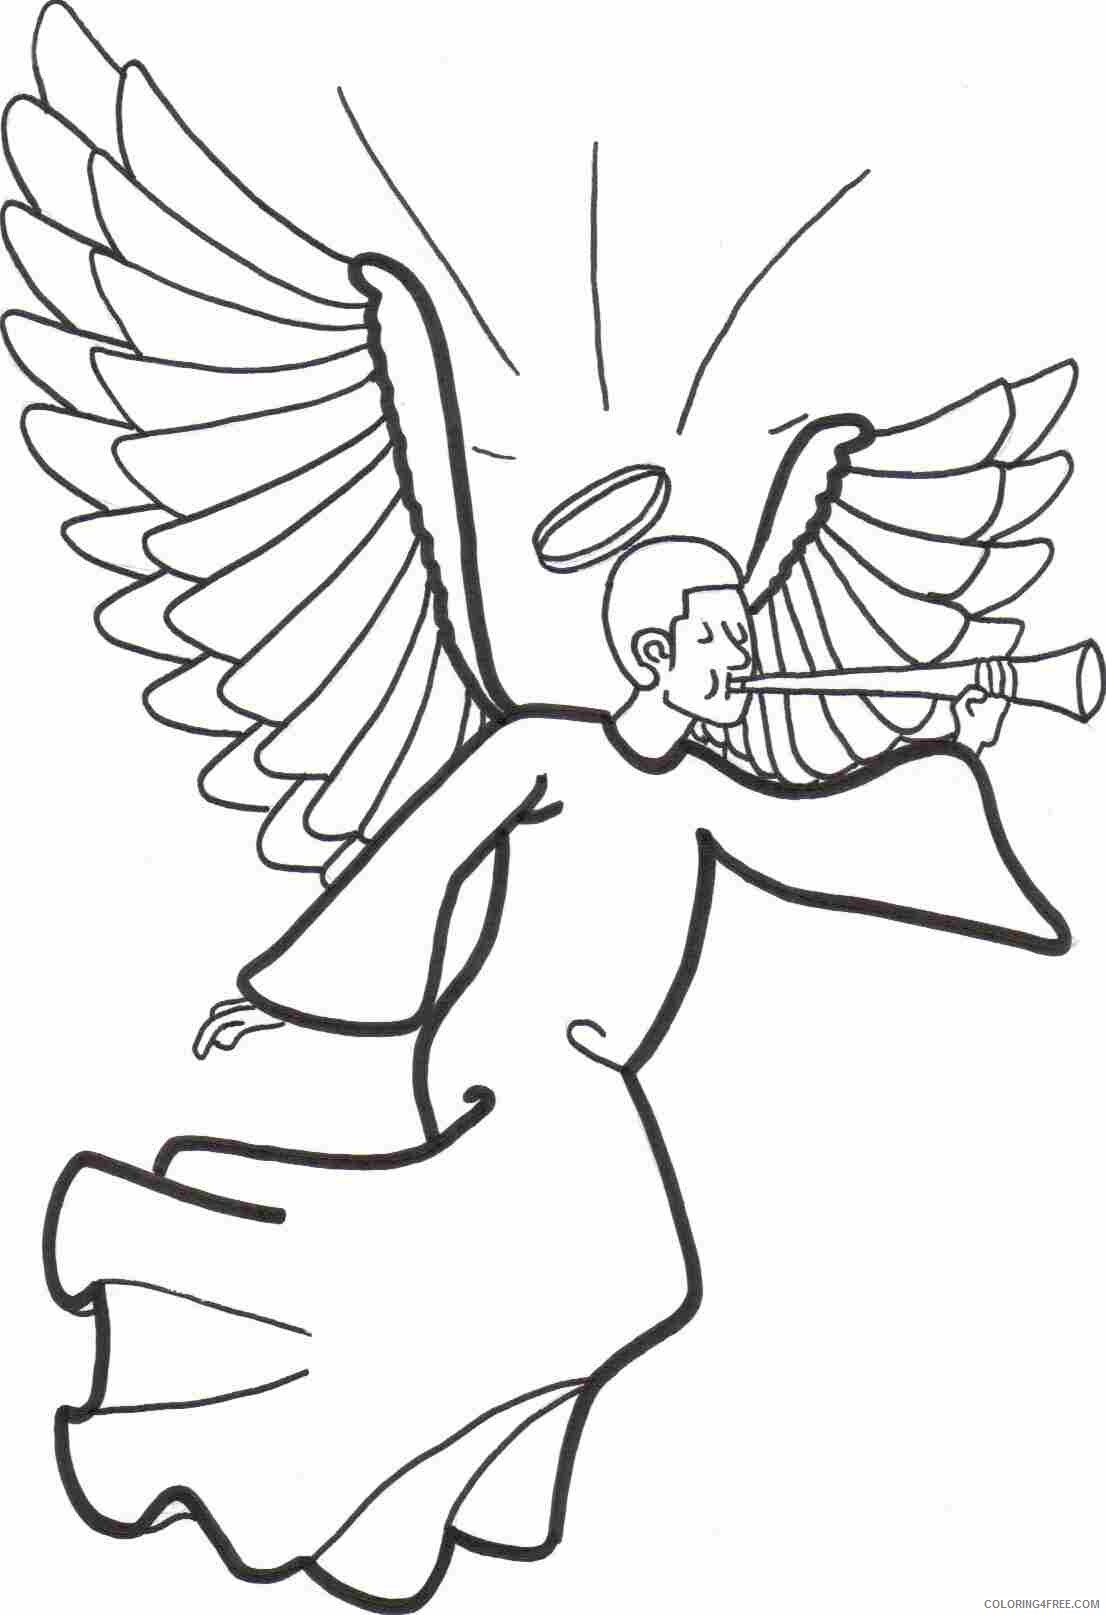 Angels Coloring Pages Angel For Preschool Printable 2021 0172 Coloring4free